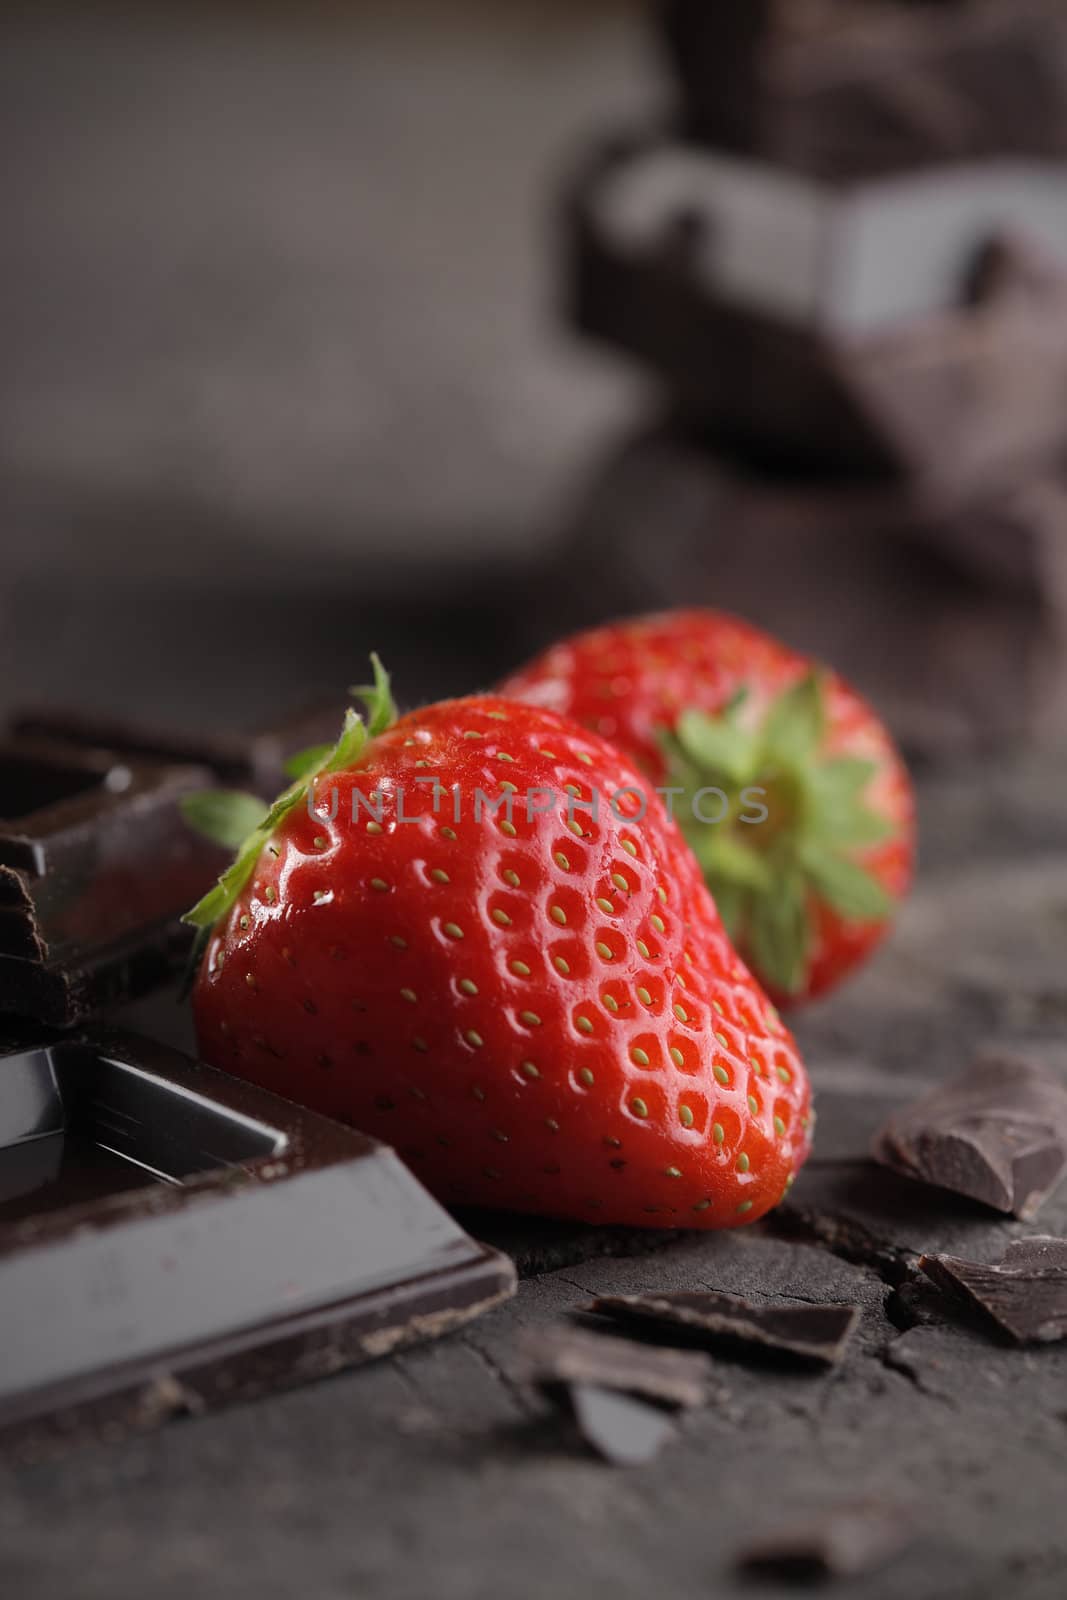 Fresh strawberries and chocolate by stokkete